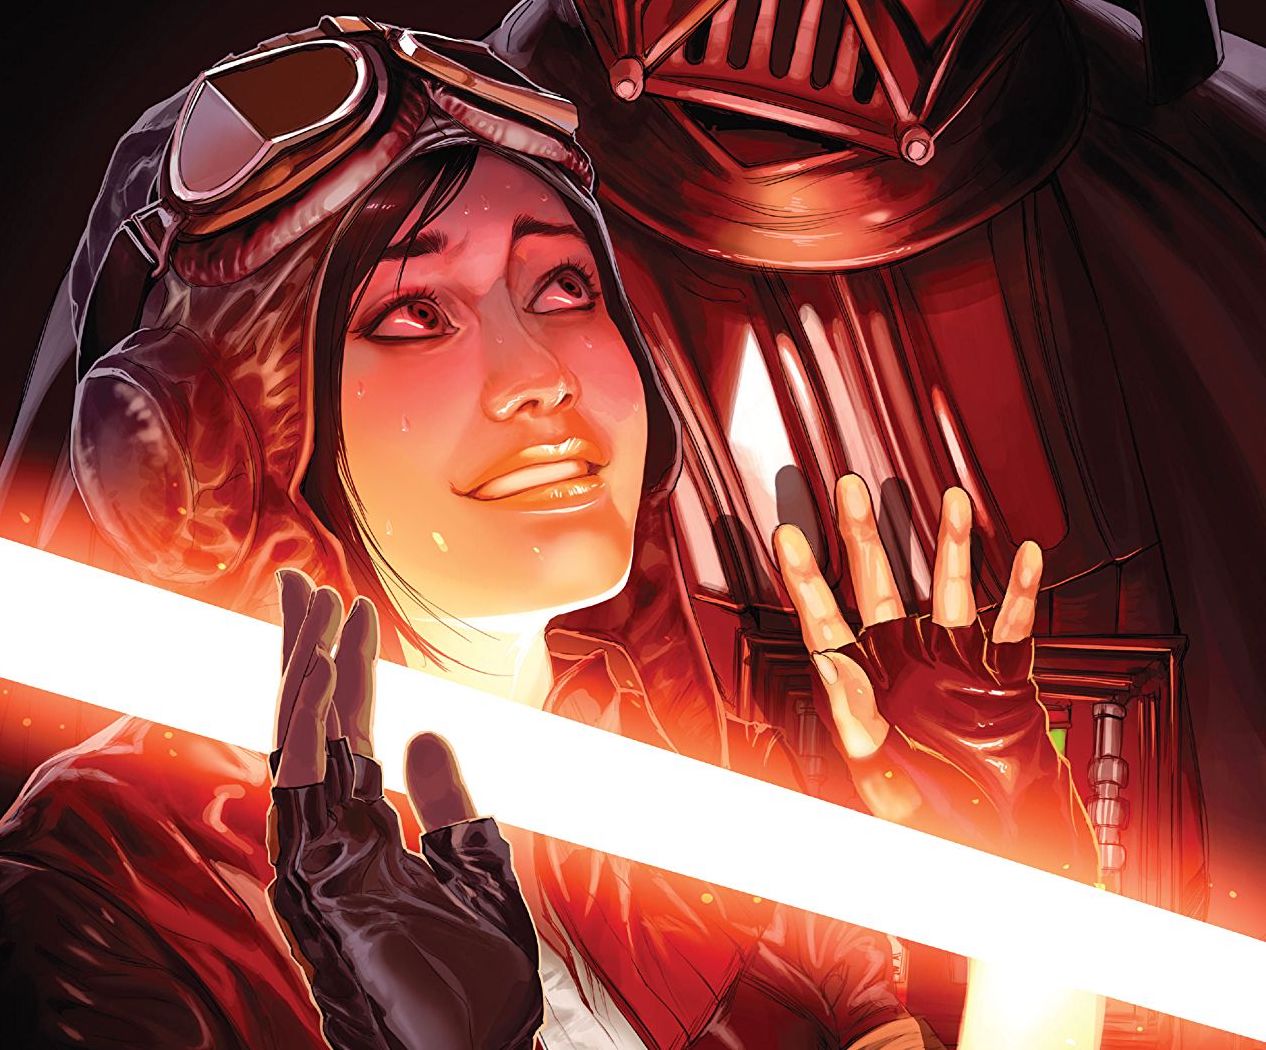 Star Wars: Doctor Aphra Vol. 7: A Rogue's End review